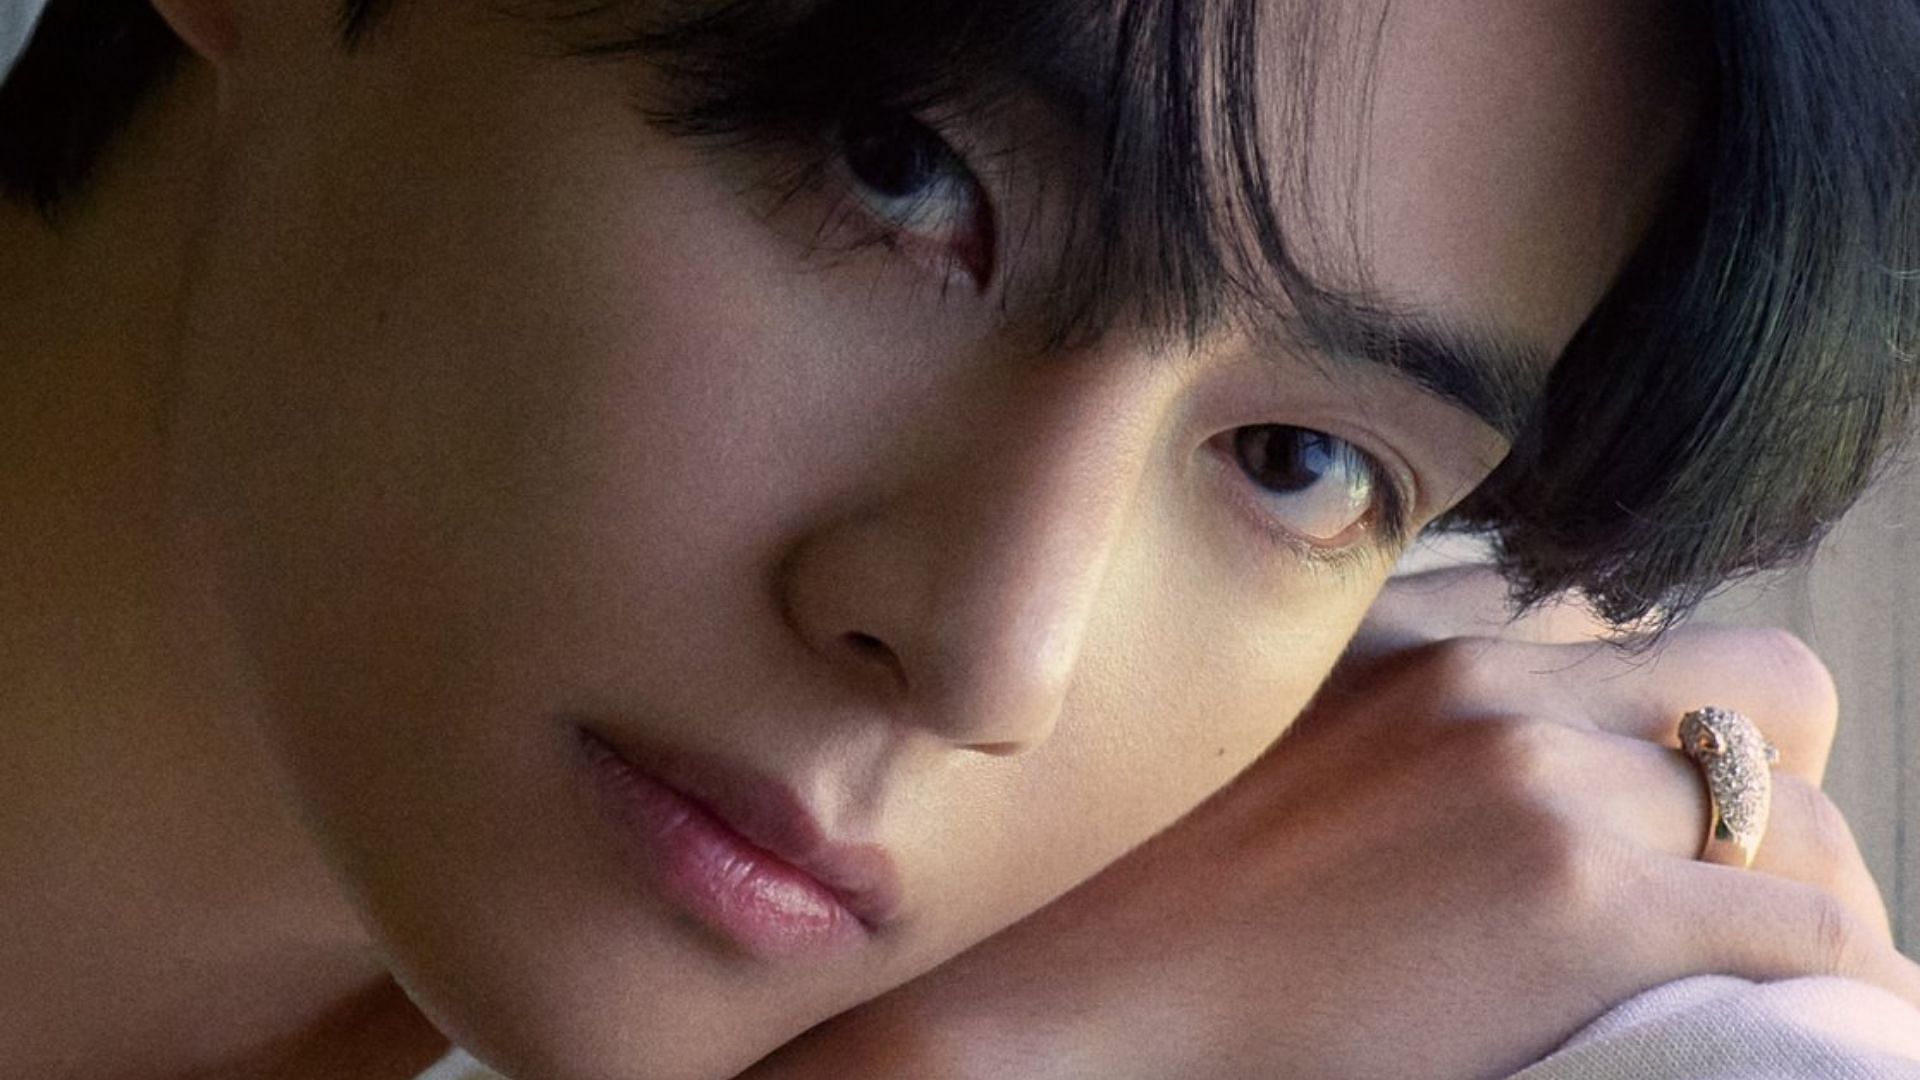 BTS V for the cover of Vogue Cover (Image via Twitter/@charts_k)